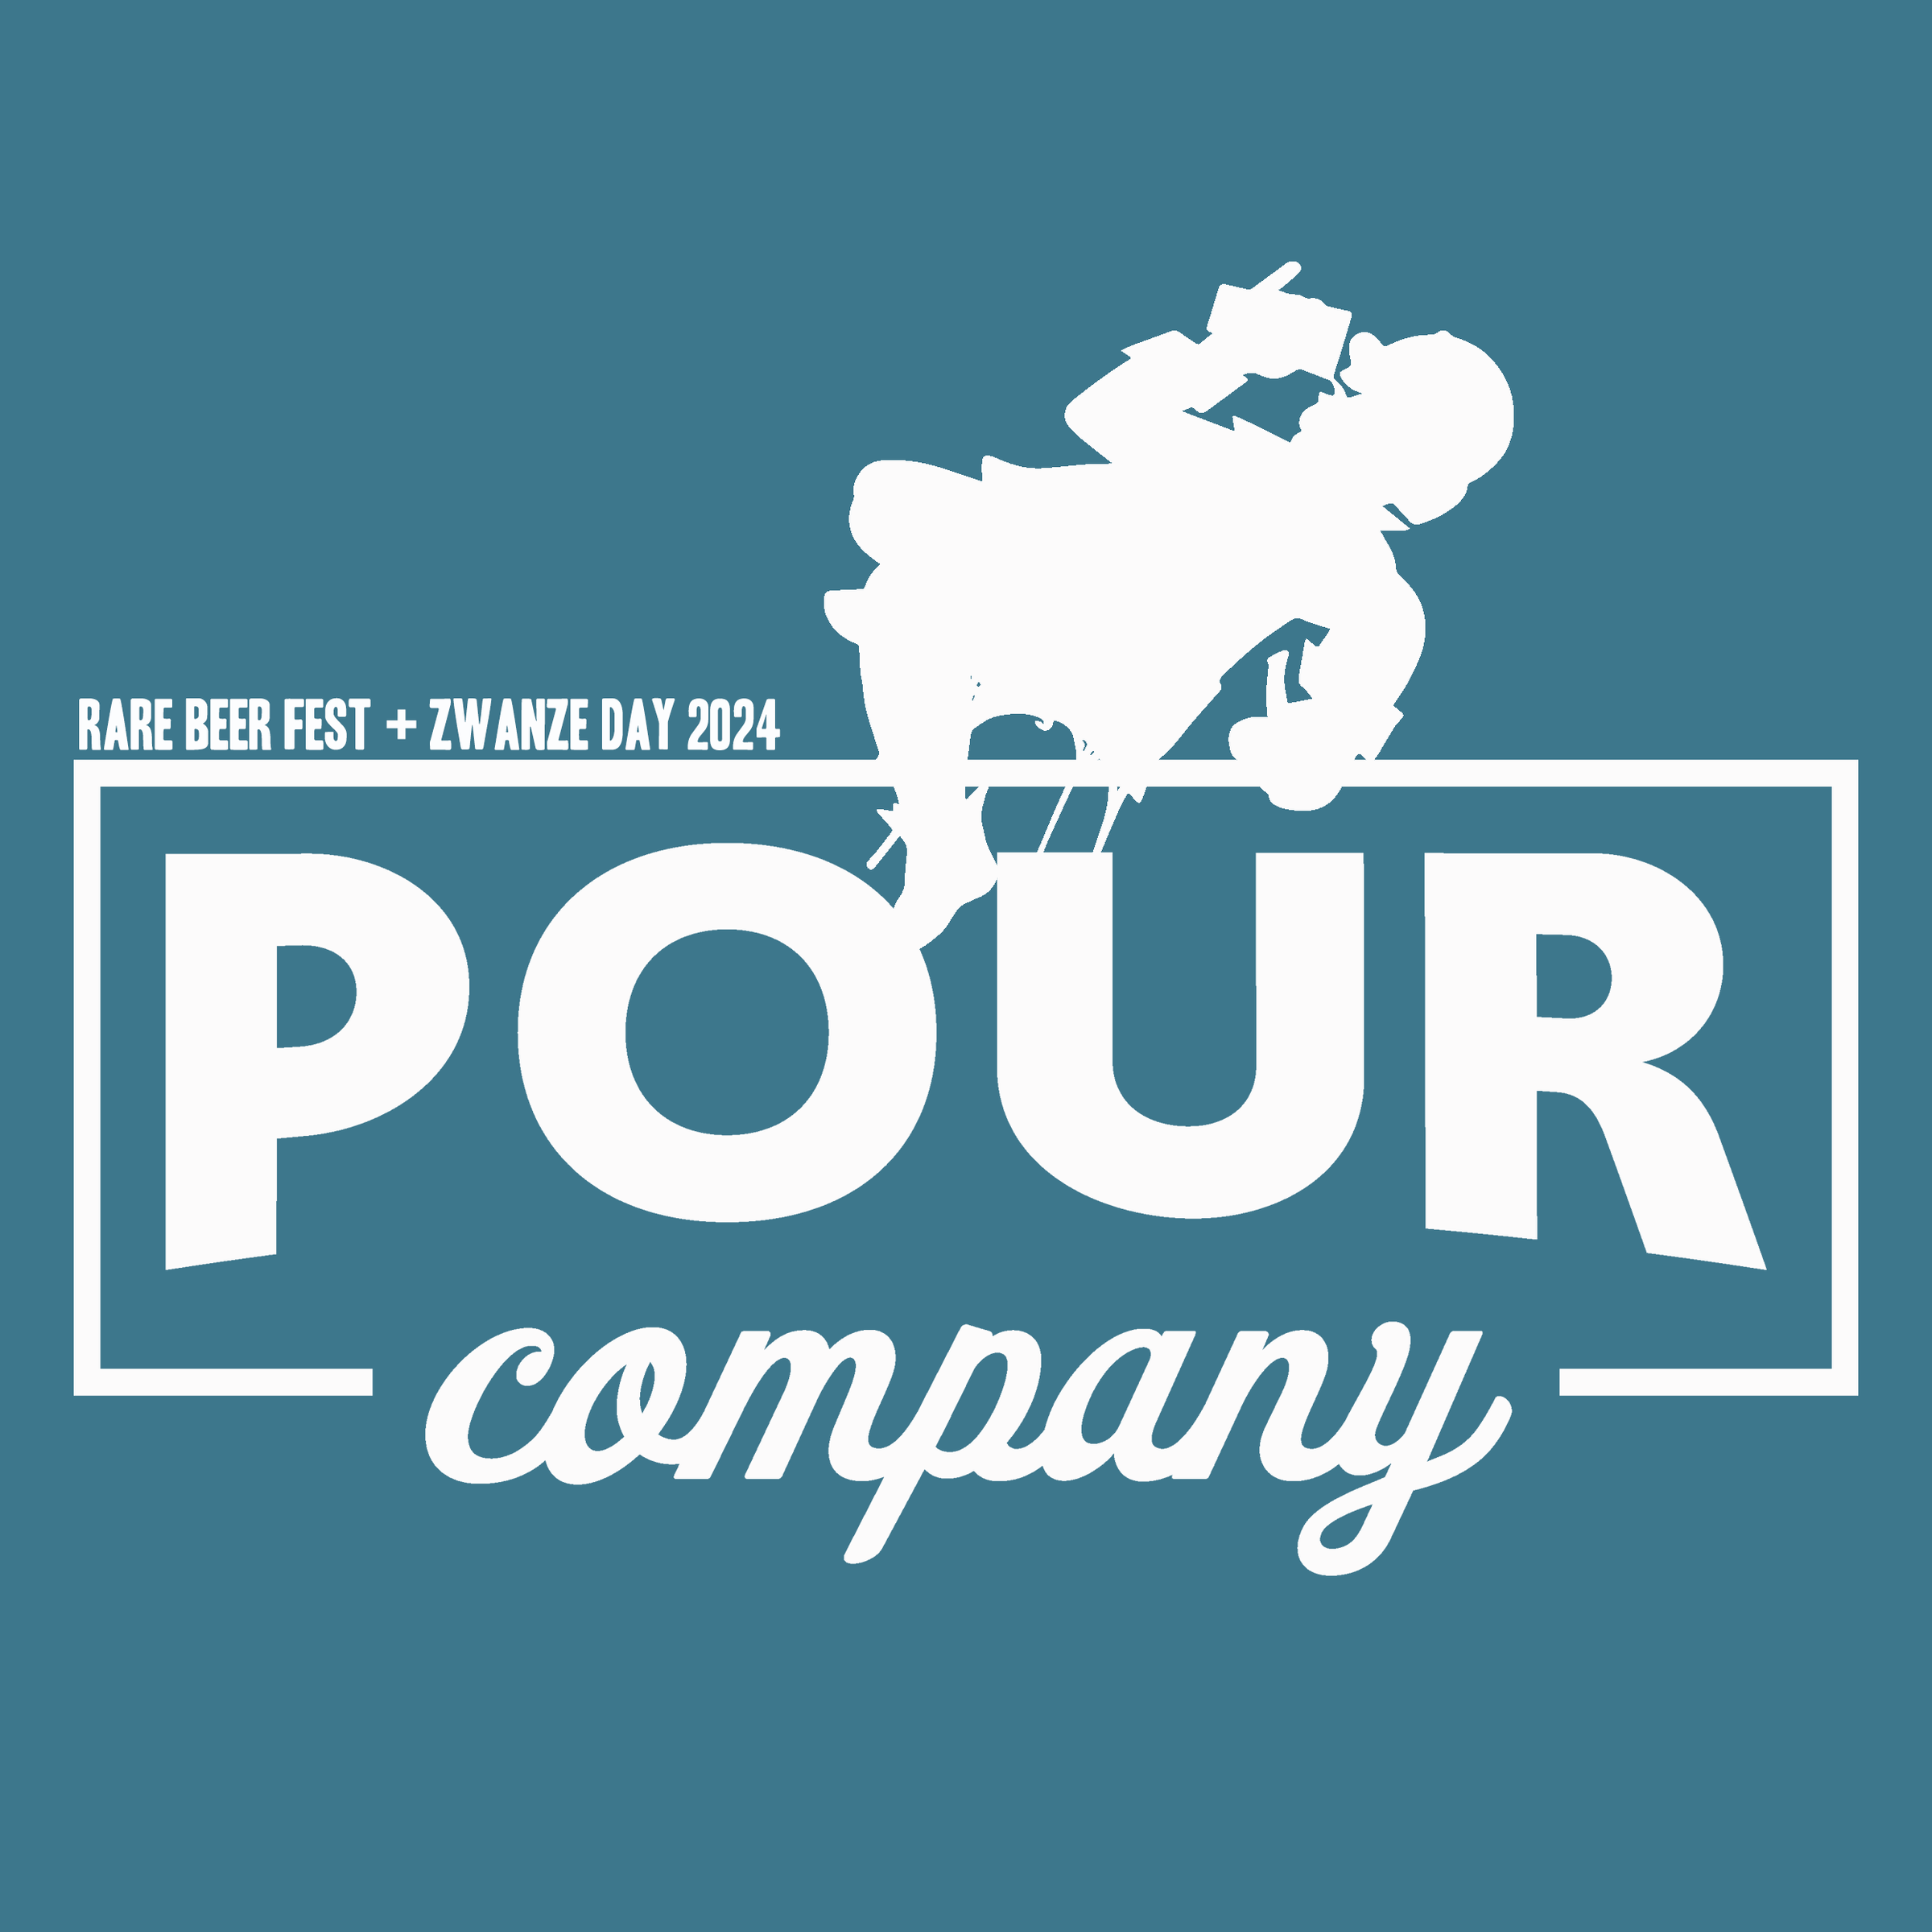 Pour Company Darkest Night  Moscow Idaho Chamber of Commerce